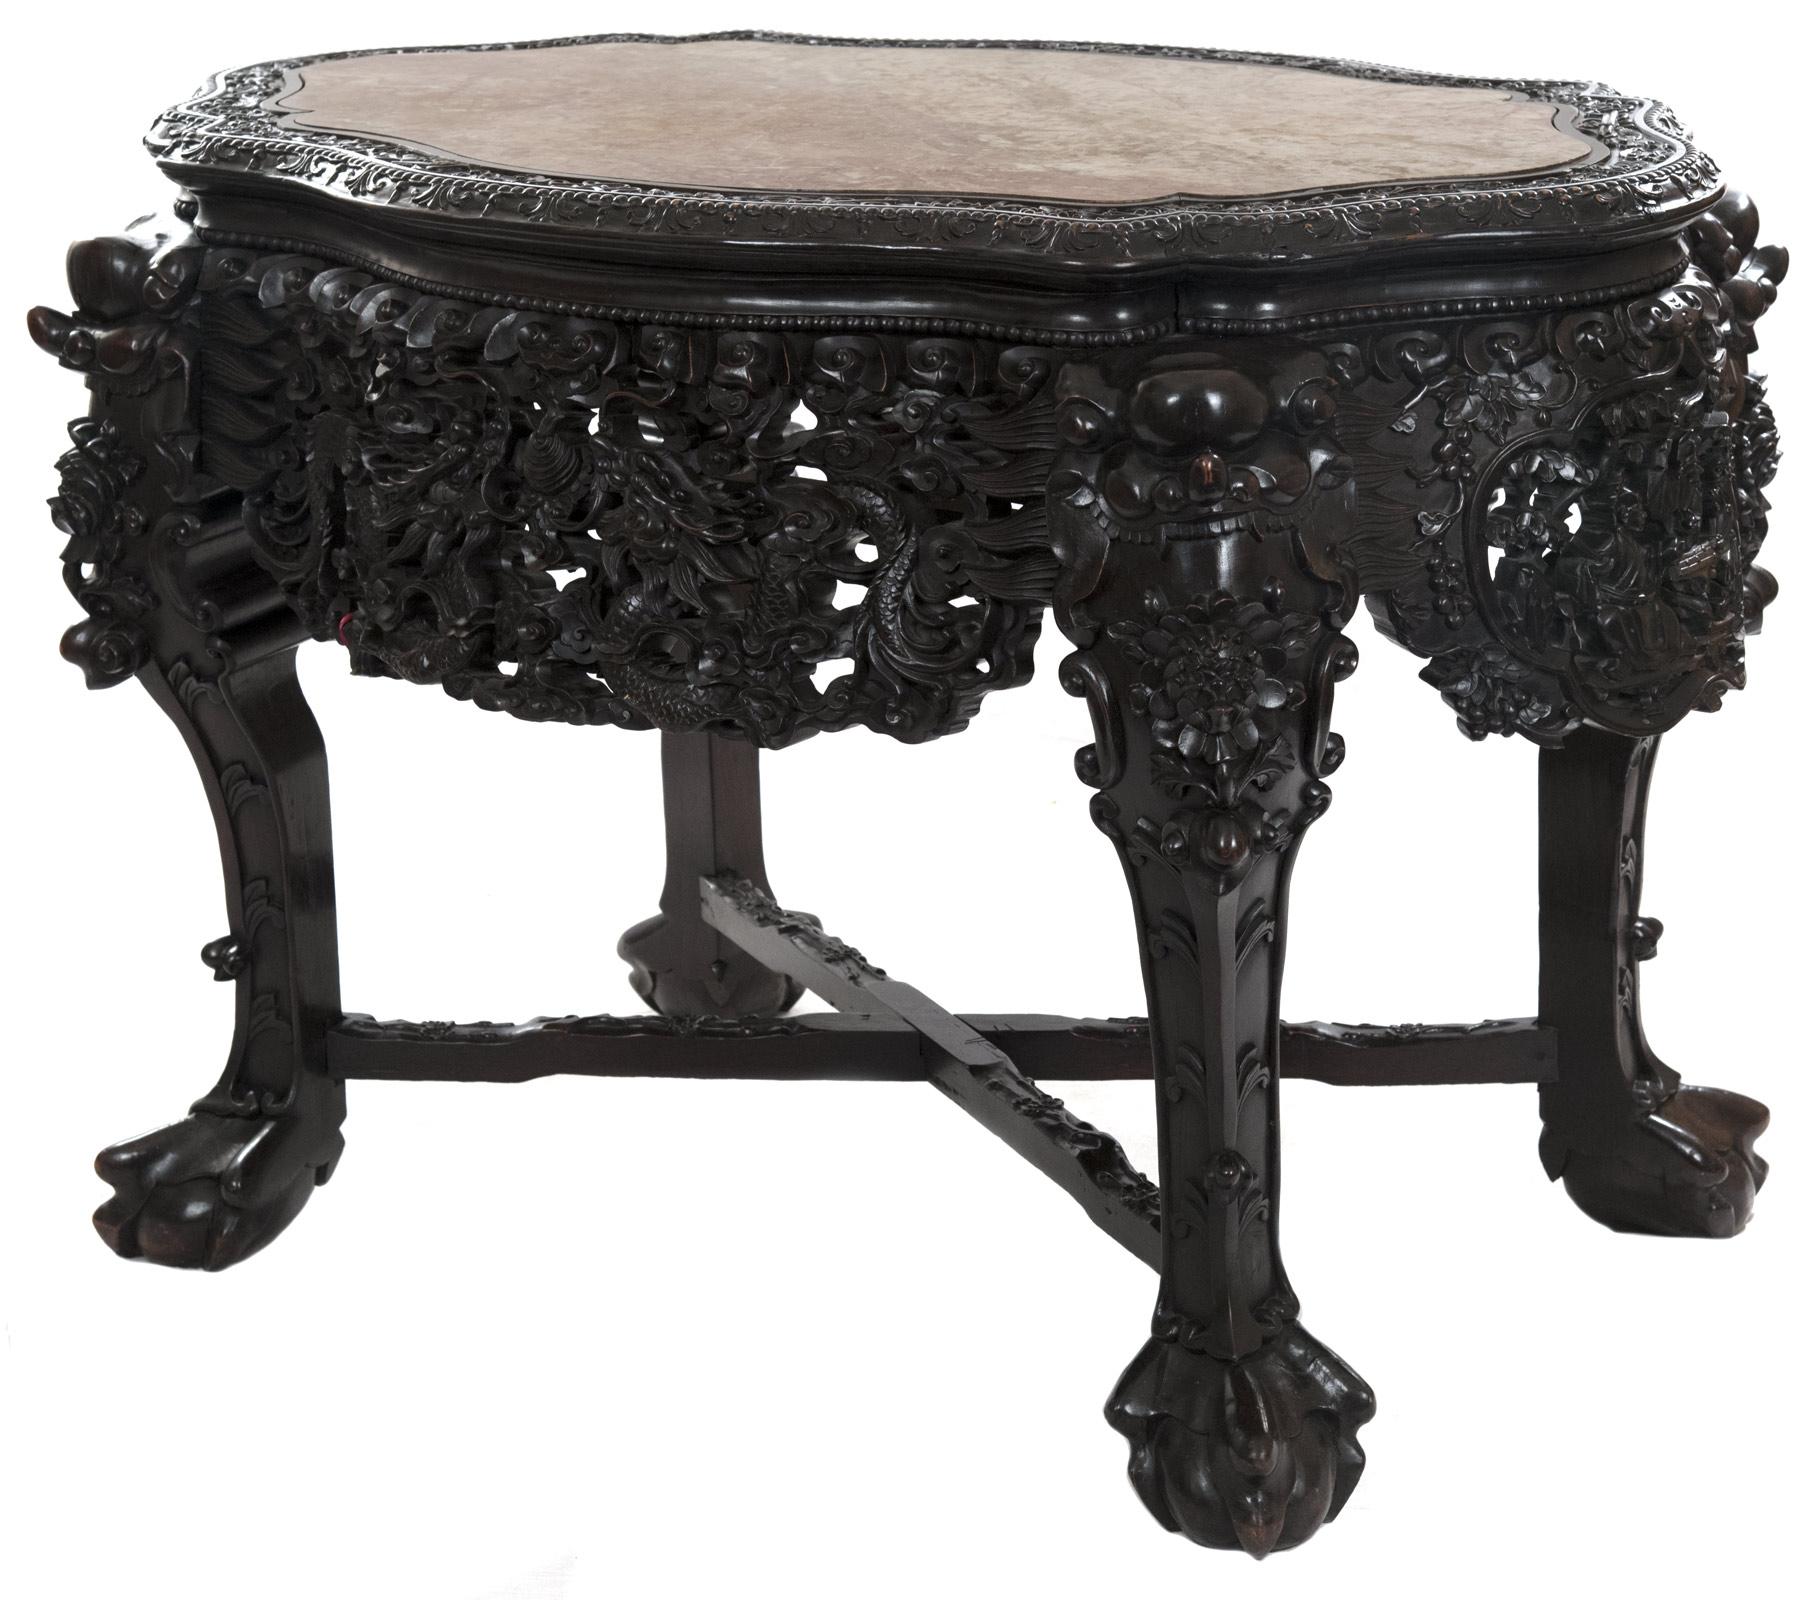 A 19th century Chinese captured-top table inset with a cartouche-shaped rouge marble top bordered by a carved and stepped edge above an elaborately carved and pierced apron with ornate dragon, floral, cloud and vine motifs. The richly carved legs,